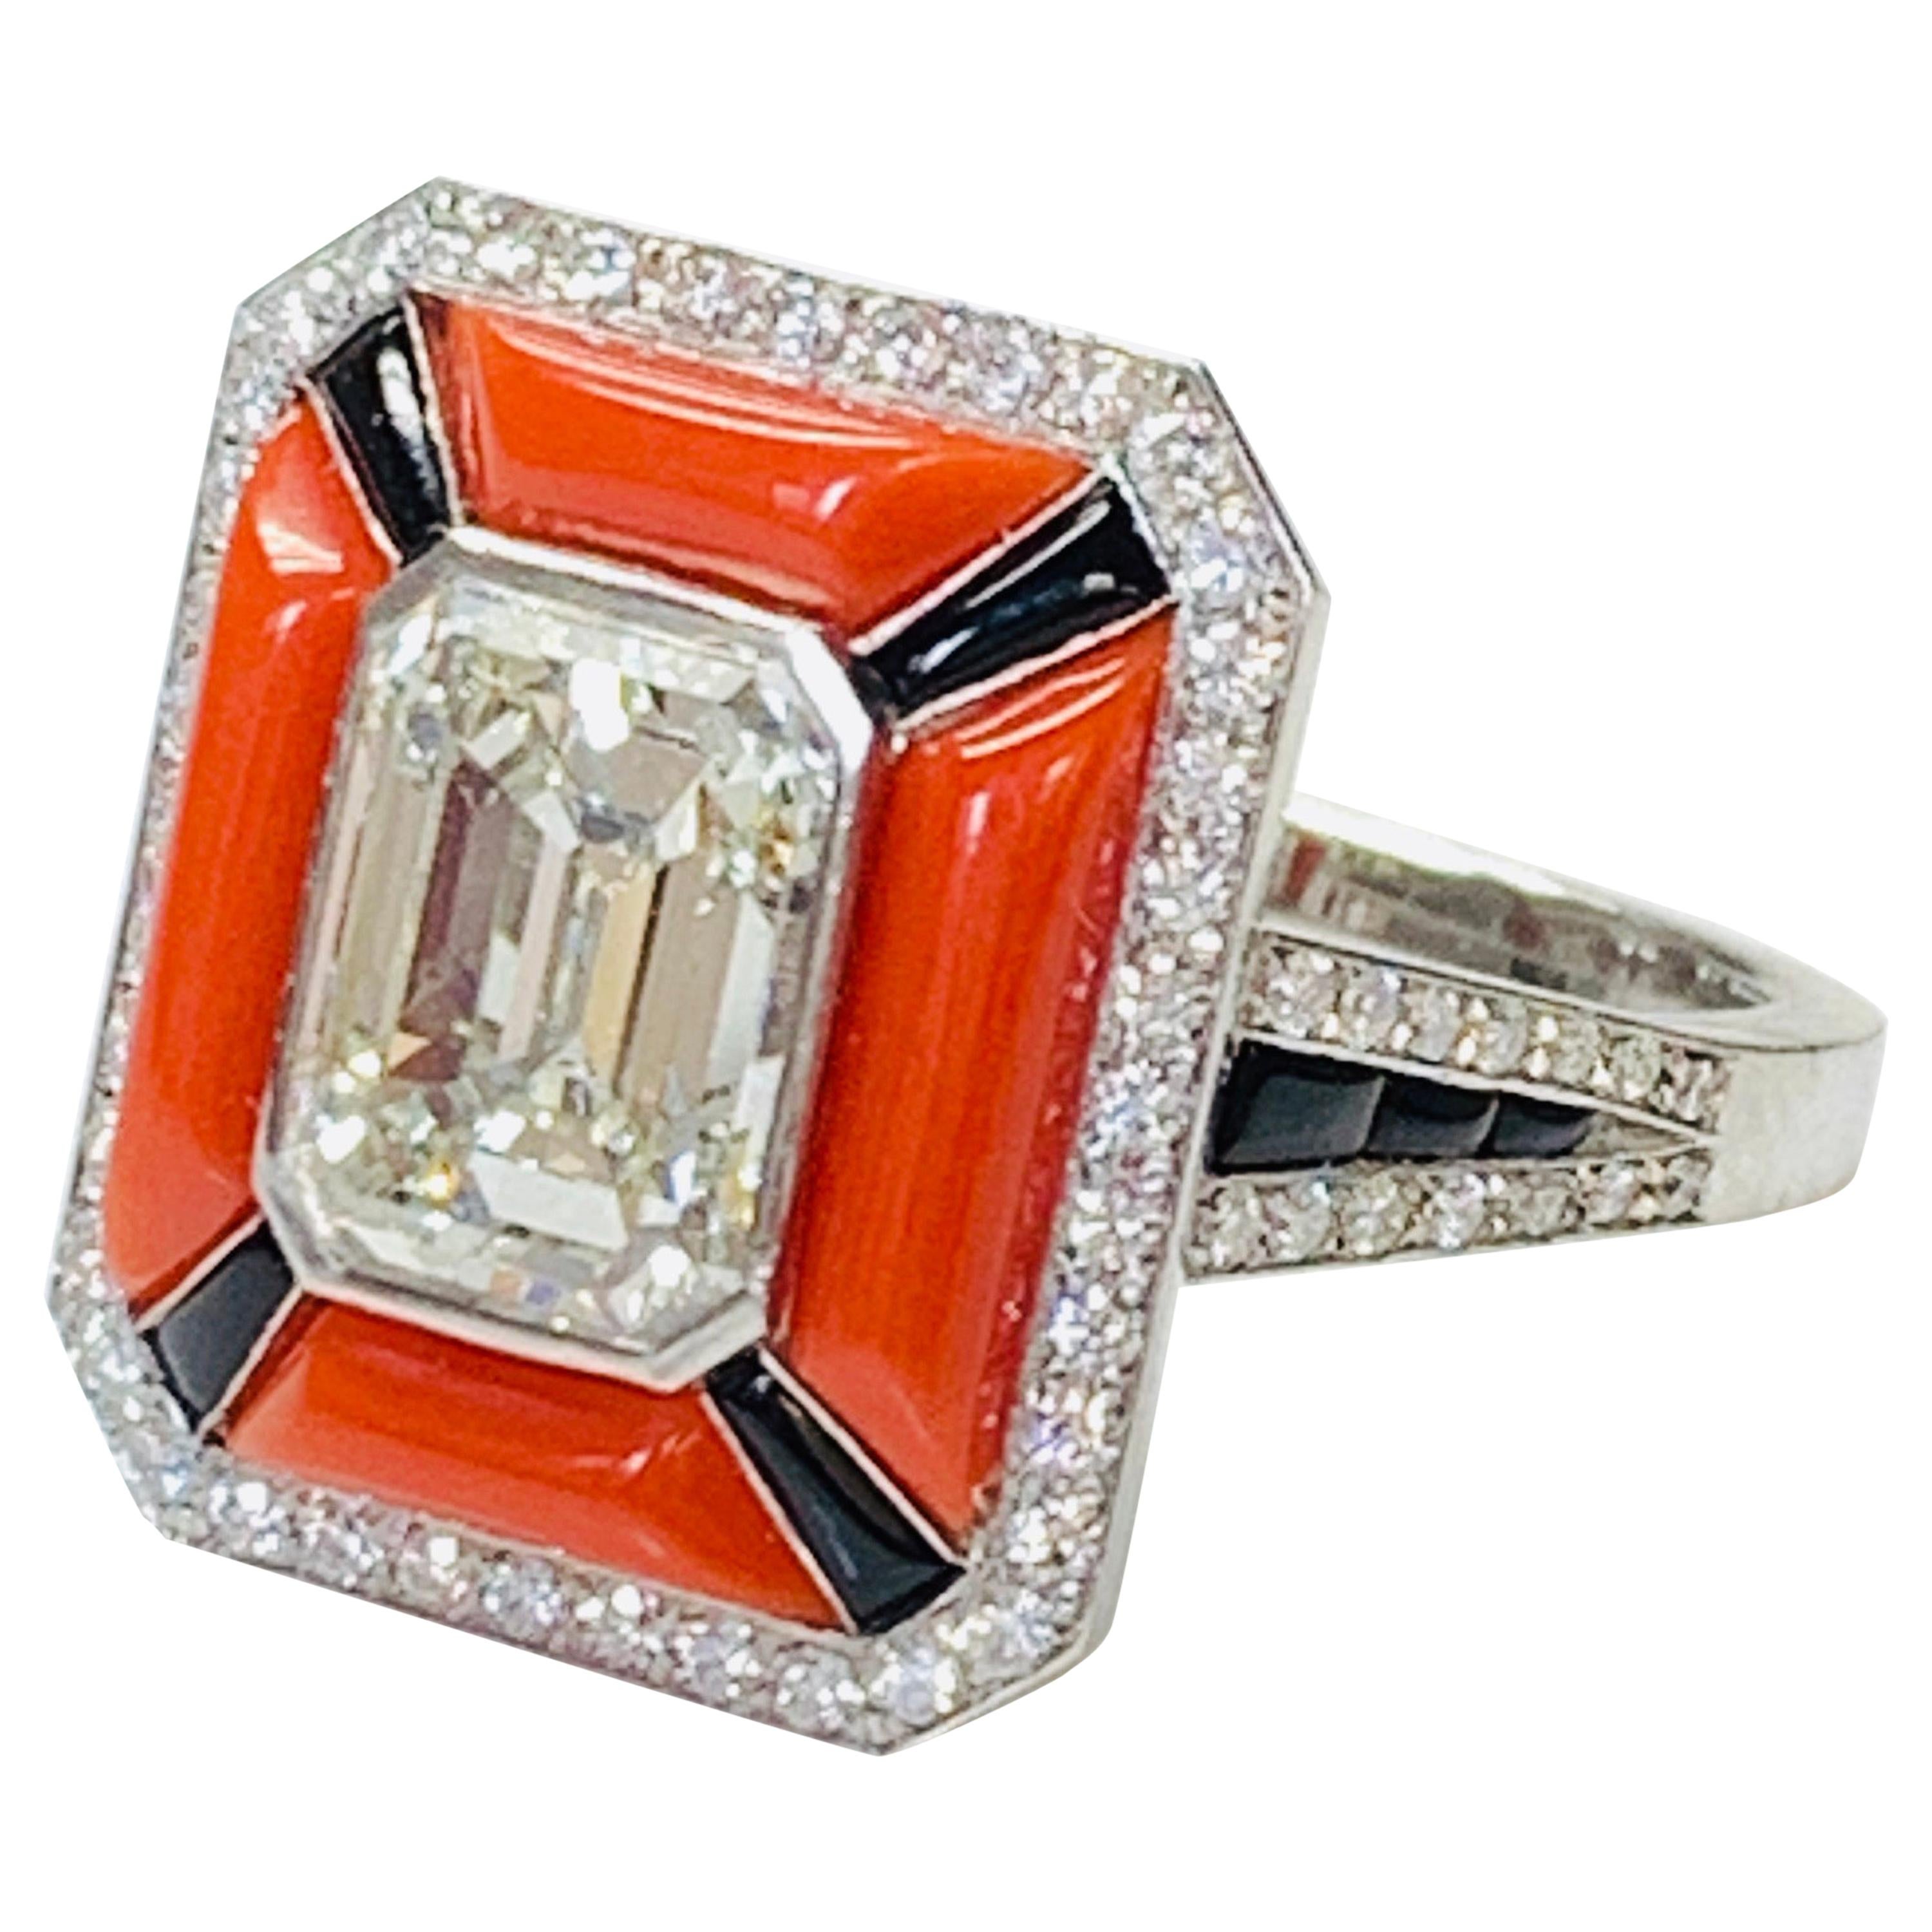 GIA Certified Emerald Cut Diamond, Coral and Onyx Engagement Ring in Platinum